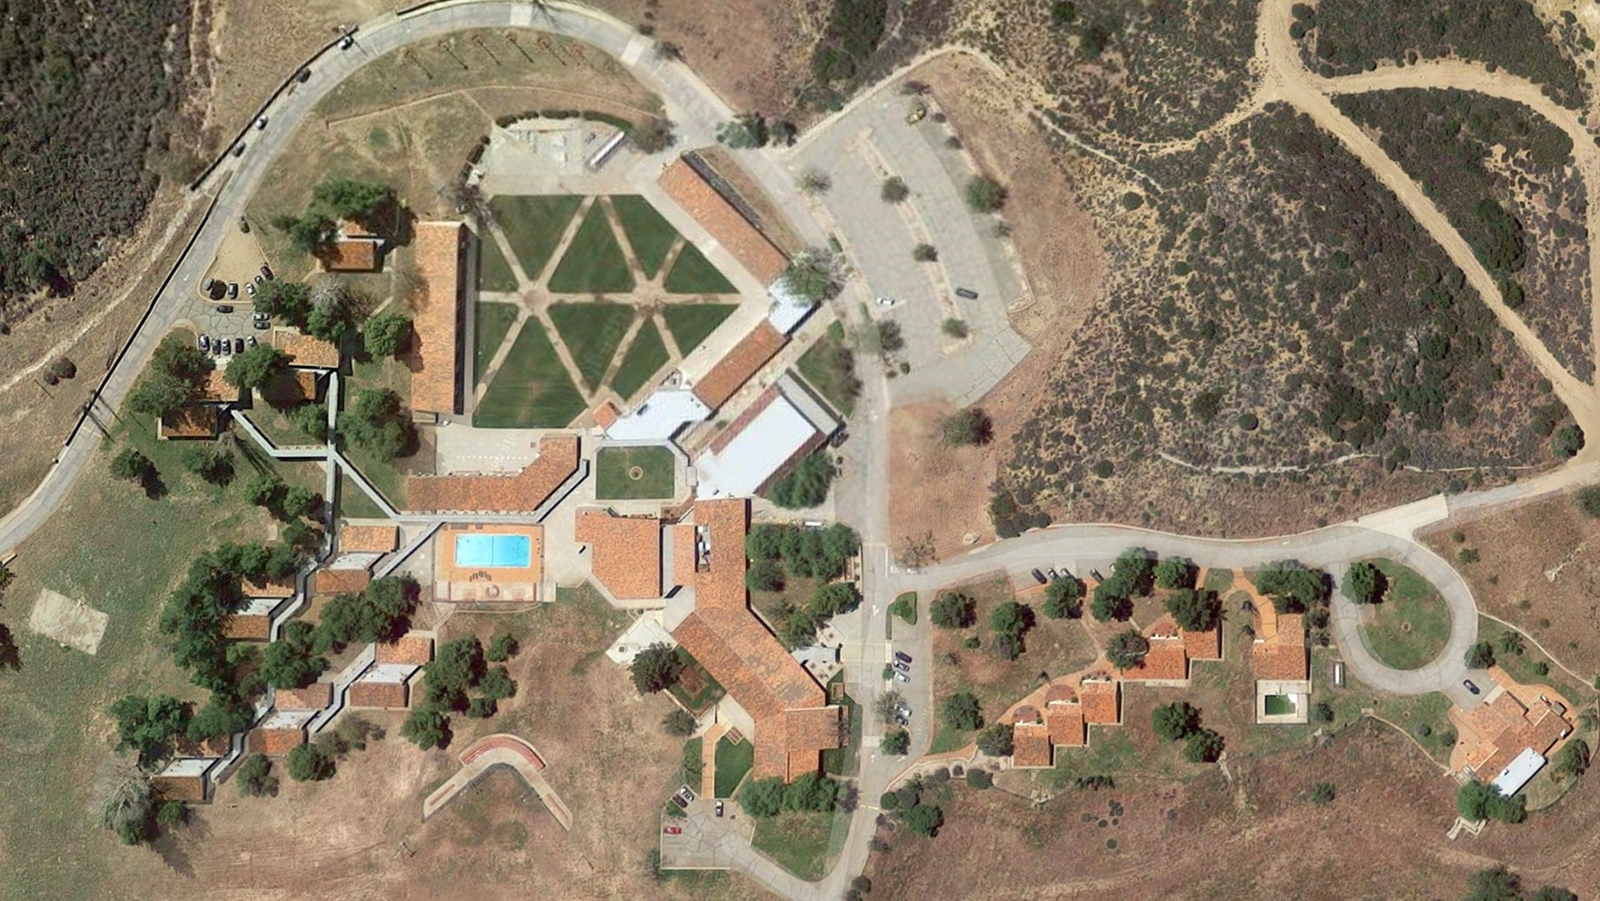 A satellite view of Olivet University in Anza, Calif. Image courtesy of Google Maps